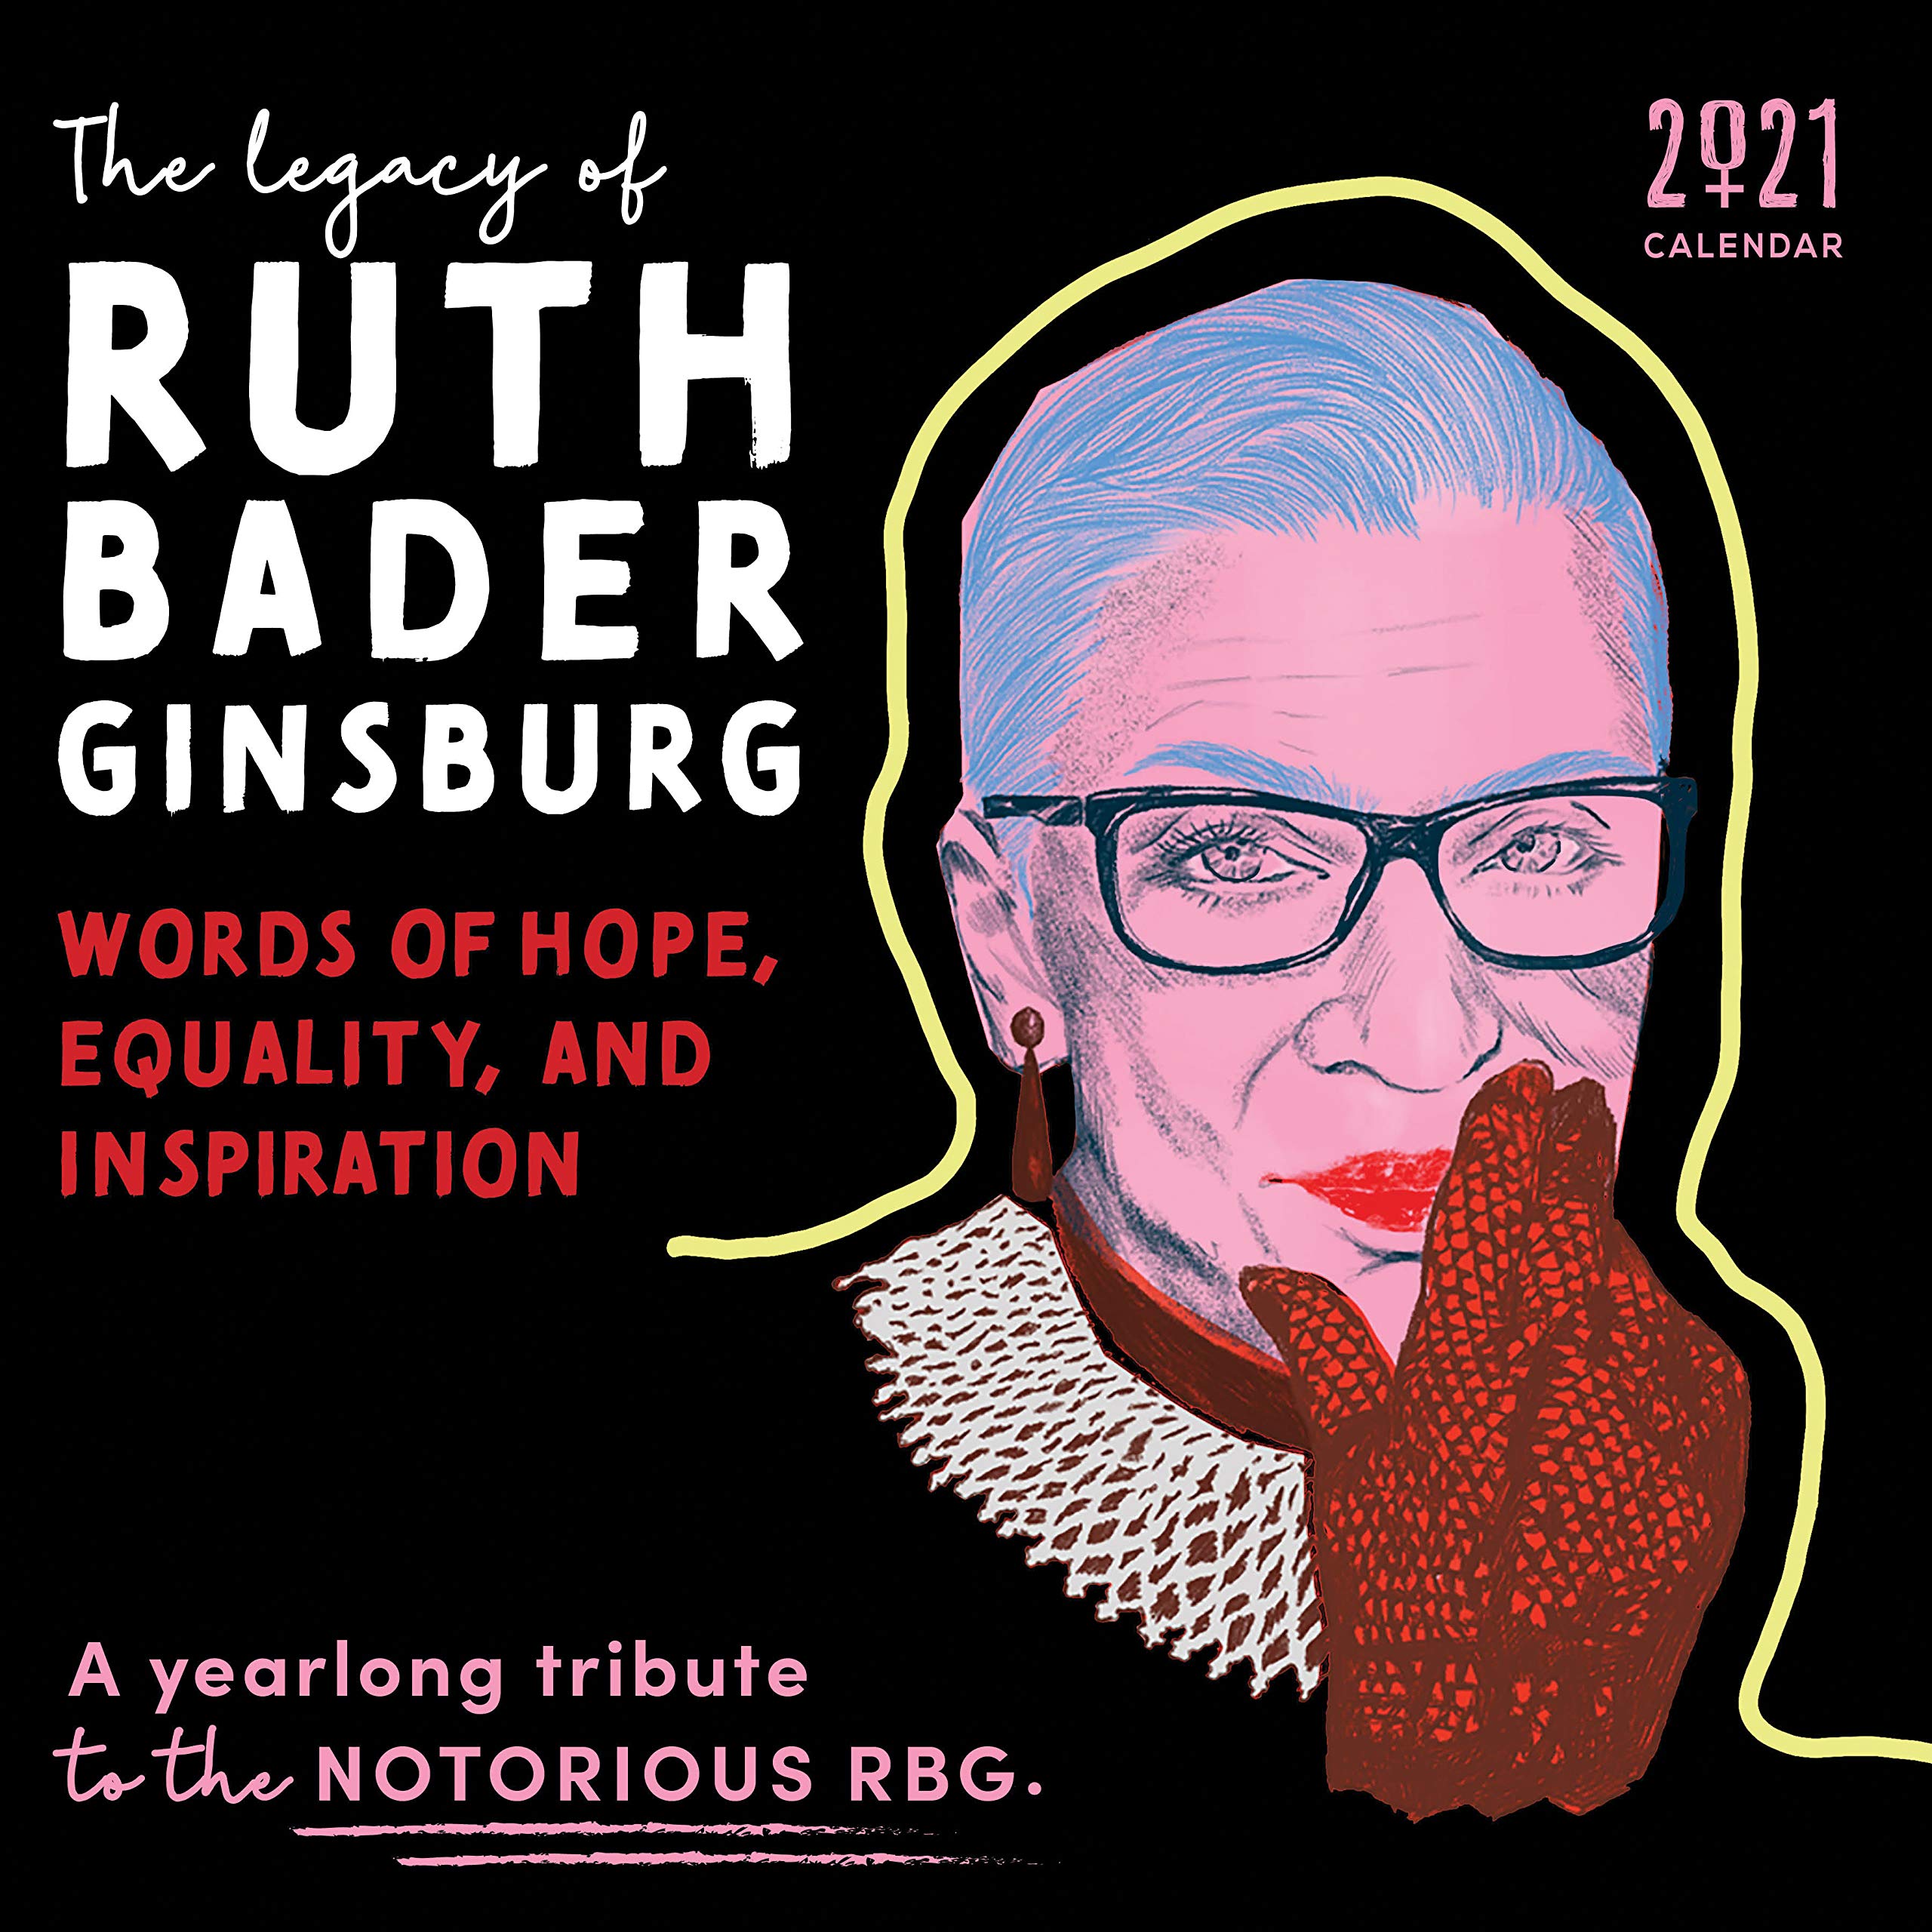 2021 The Legacy of Ruth Bader Ginsburg Wall Calendar: Her Words of Hope, Equality and Inspiration ― A yearlong tribute to the notorious RBG (12-Month Monthly Calendar)